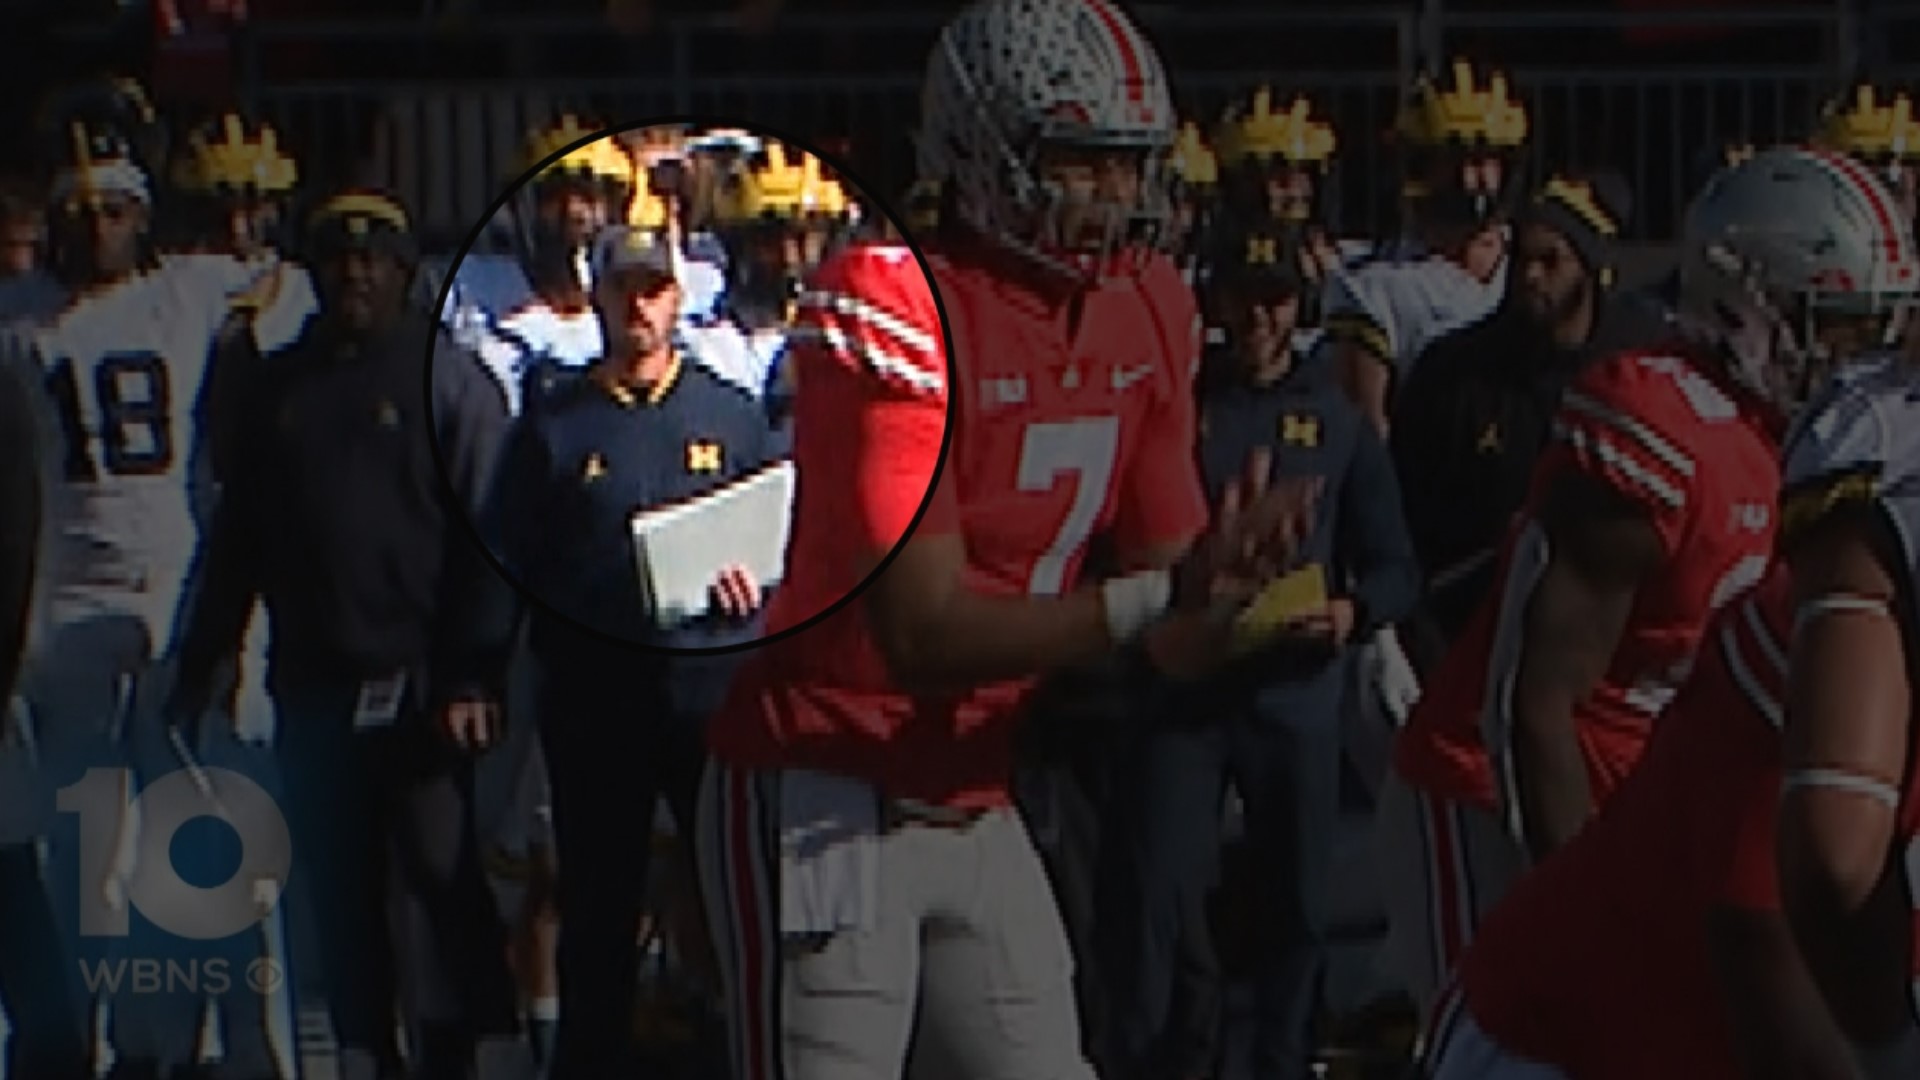 Video recorded by WBNS-10TV shows a person believed to be Connor Stalions, an analyst at Michigan, on the Wolverine sideline alongside the defensive coordinator.